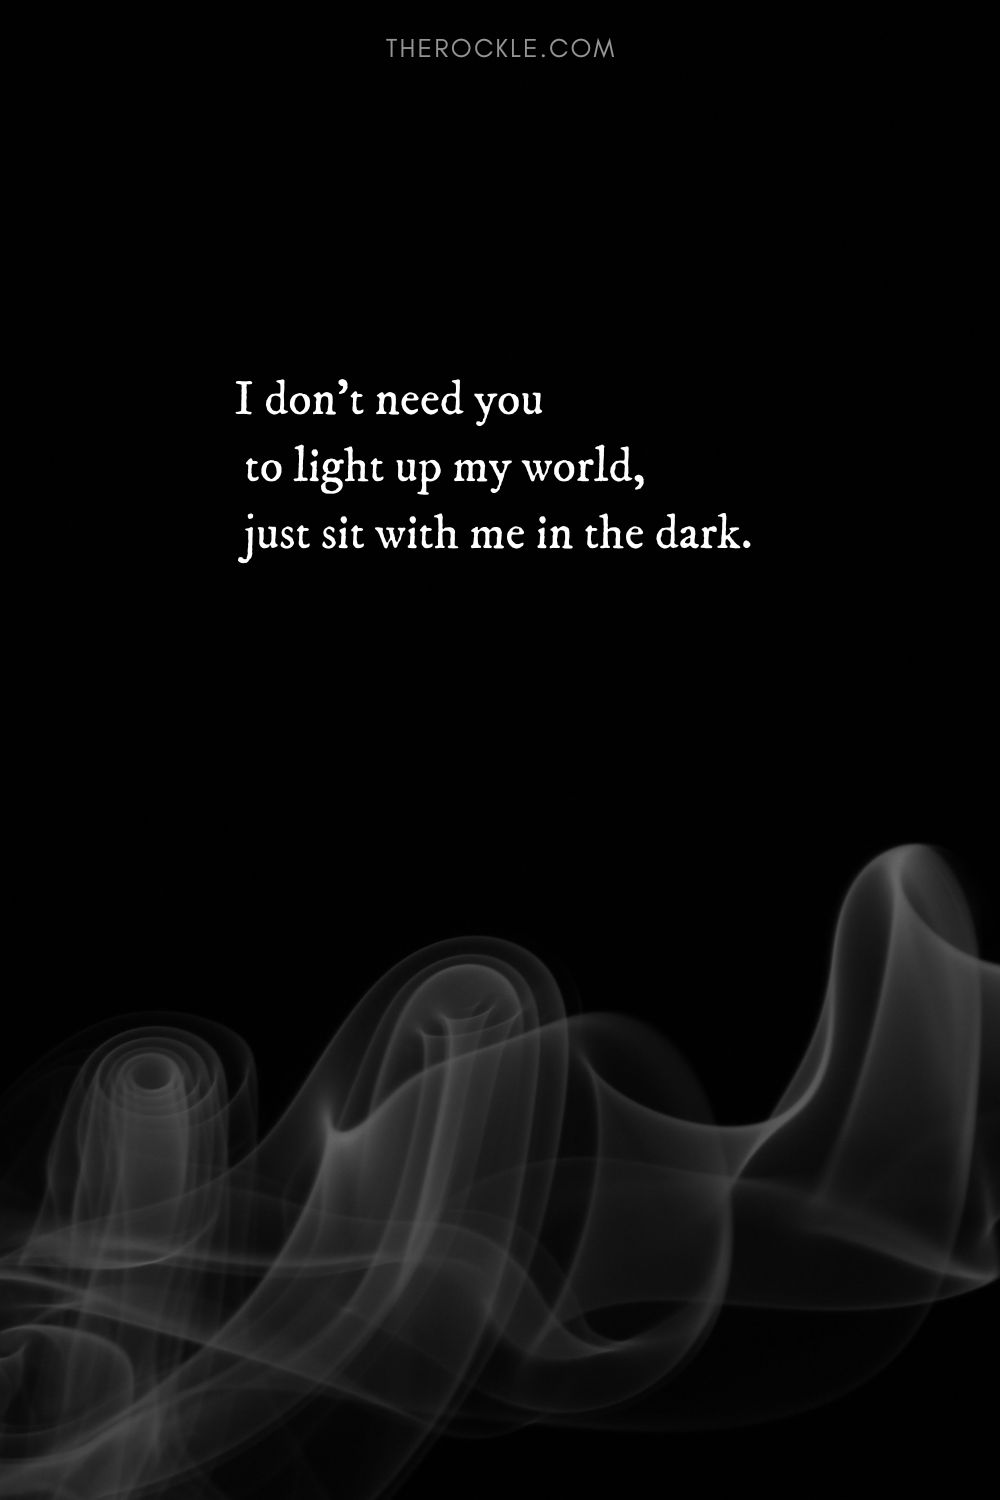 “I don't need you to light up my world, just sit with me in the dark.”